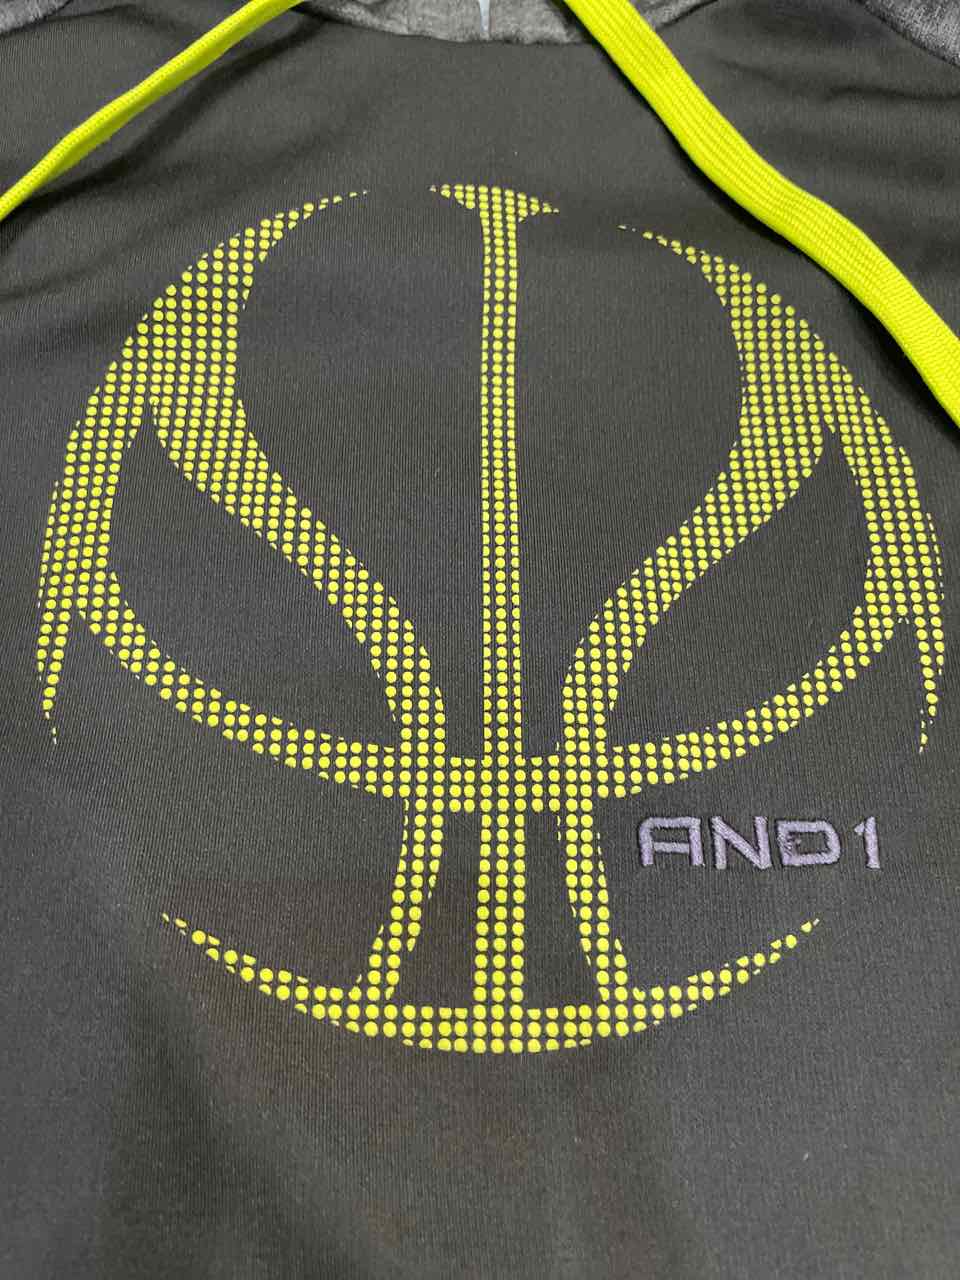 L - And 1 Hoodie